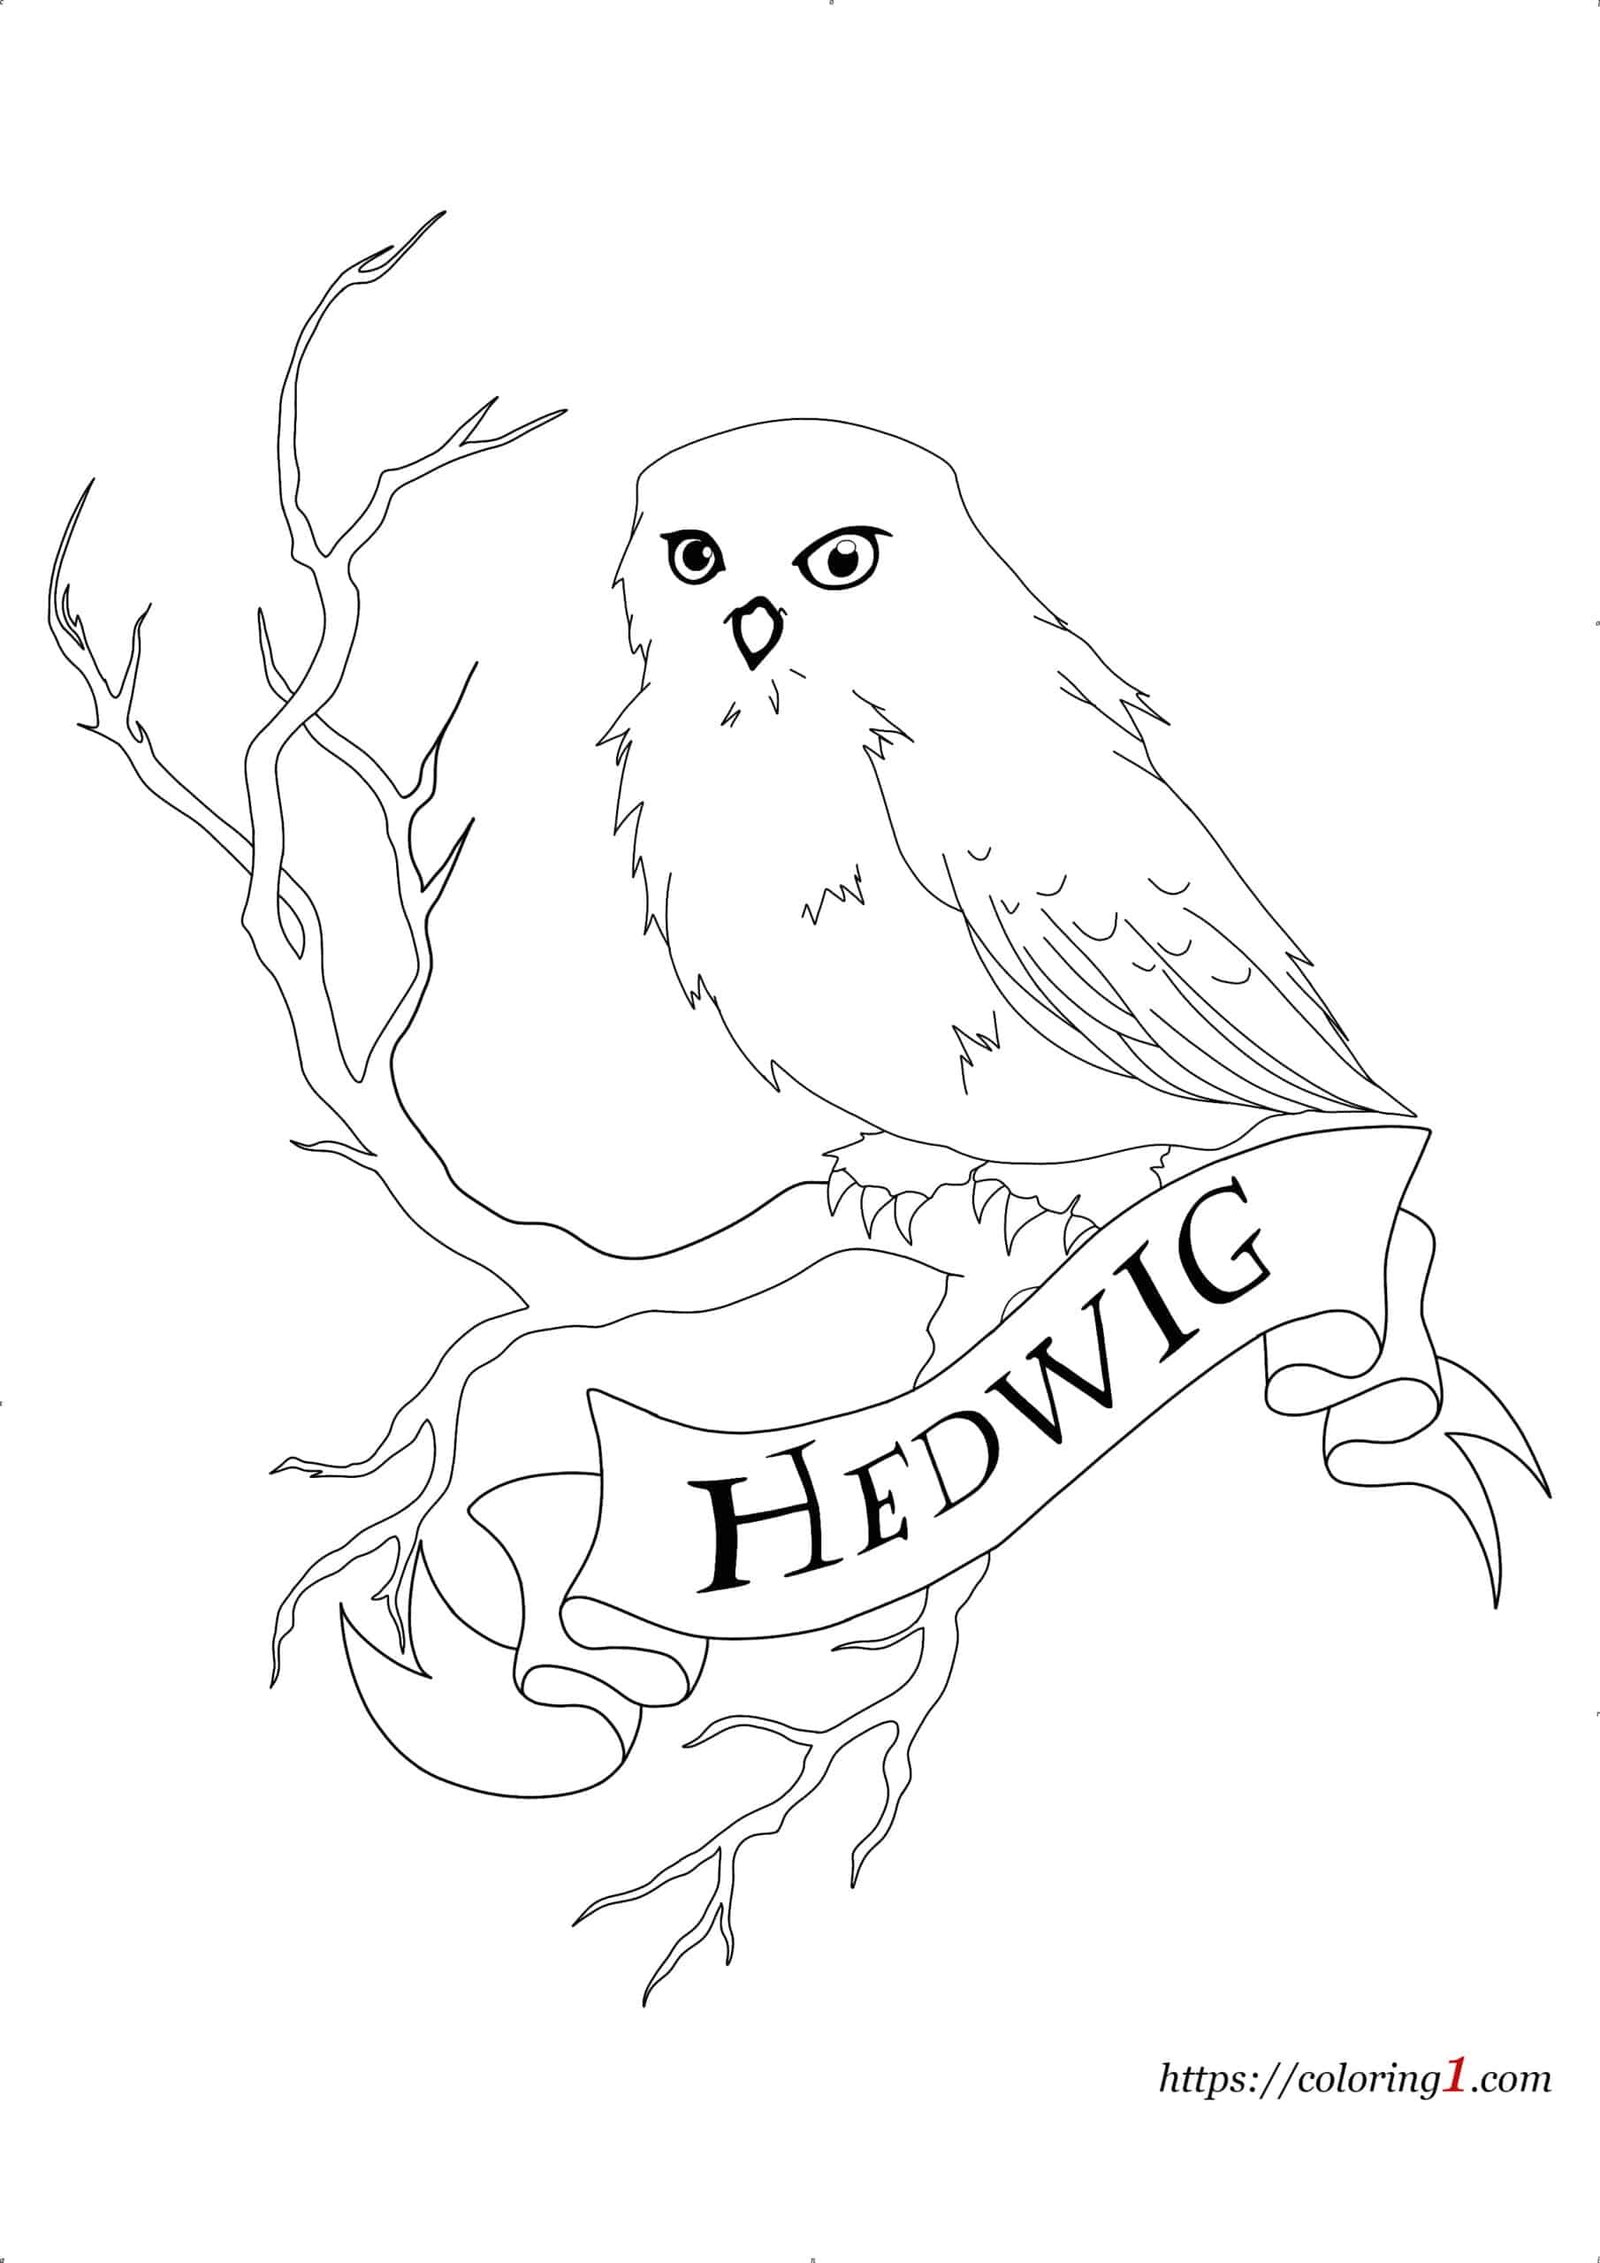 Harry Potter Owl Hedwig coloring page